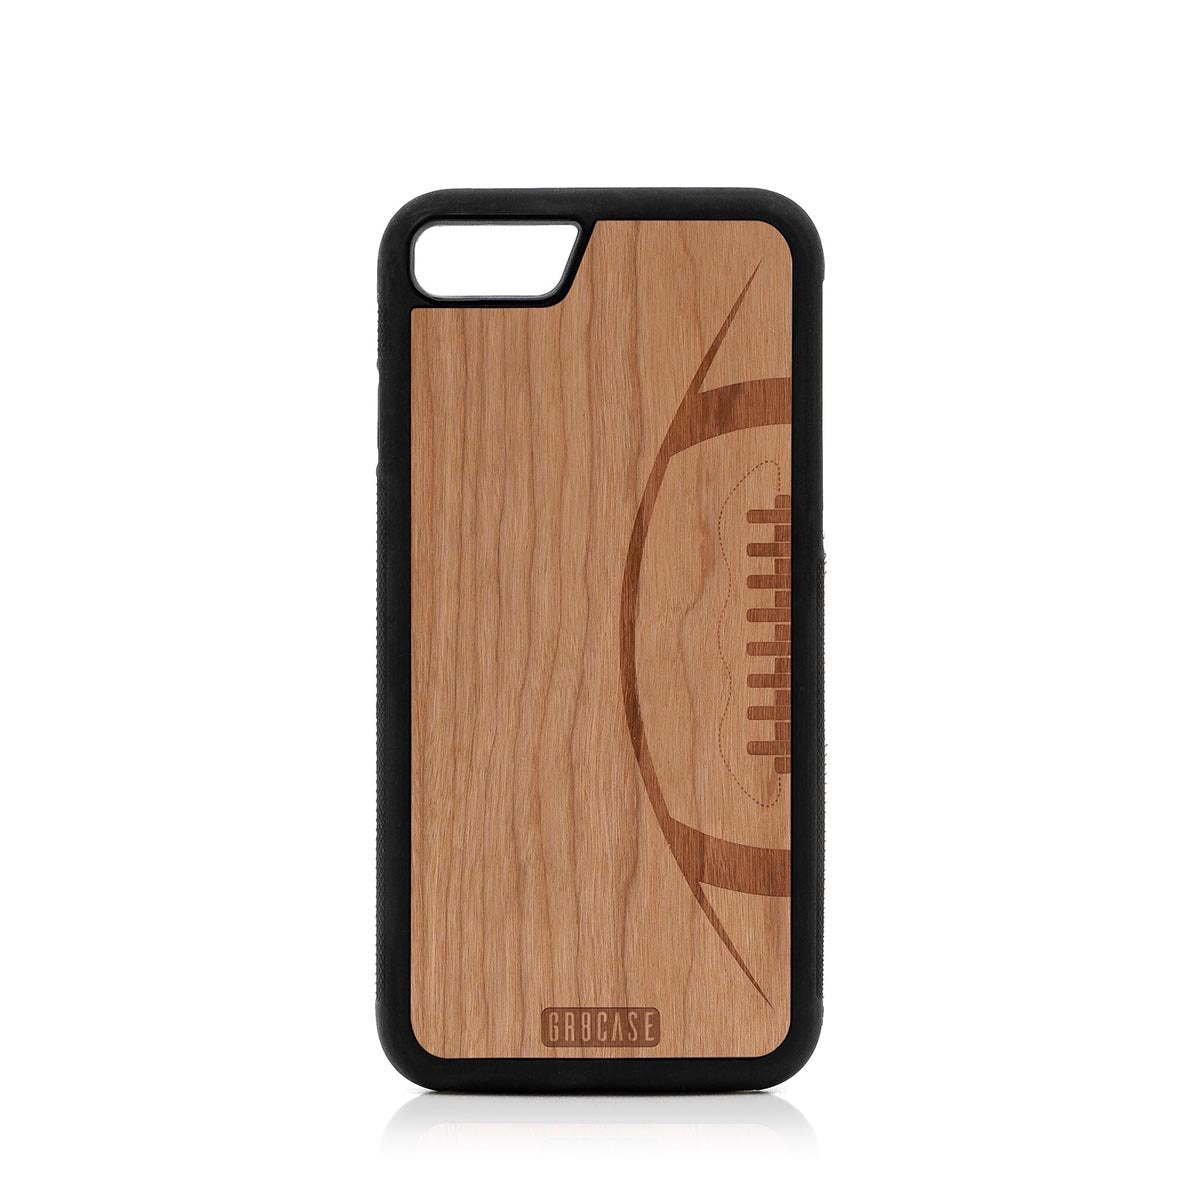 Football Design Wood Case For iPhone SE 2020 by GR8CASE